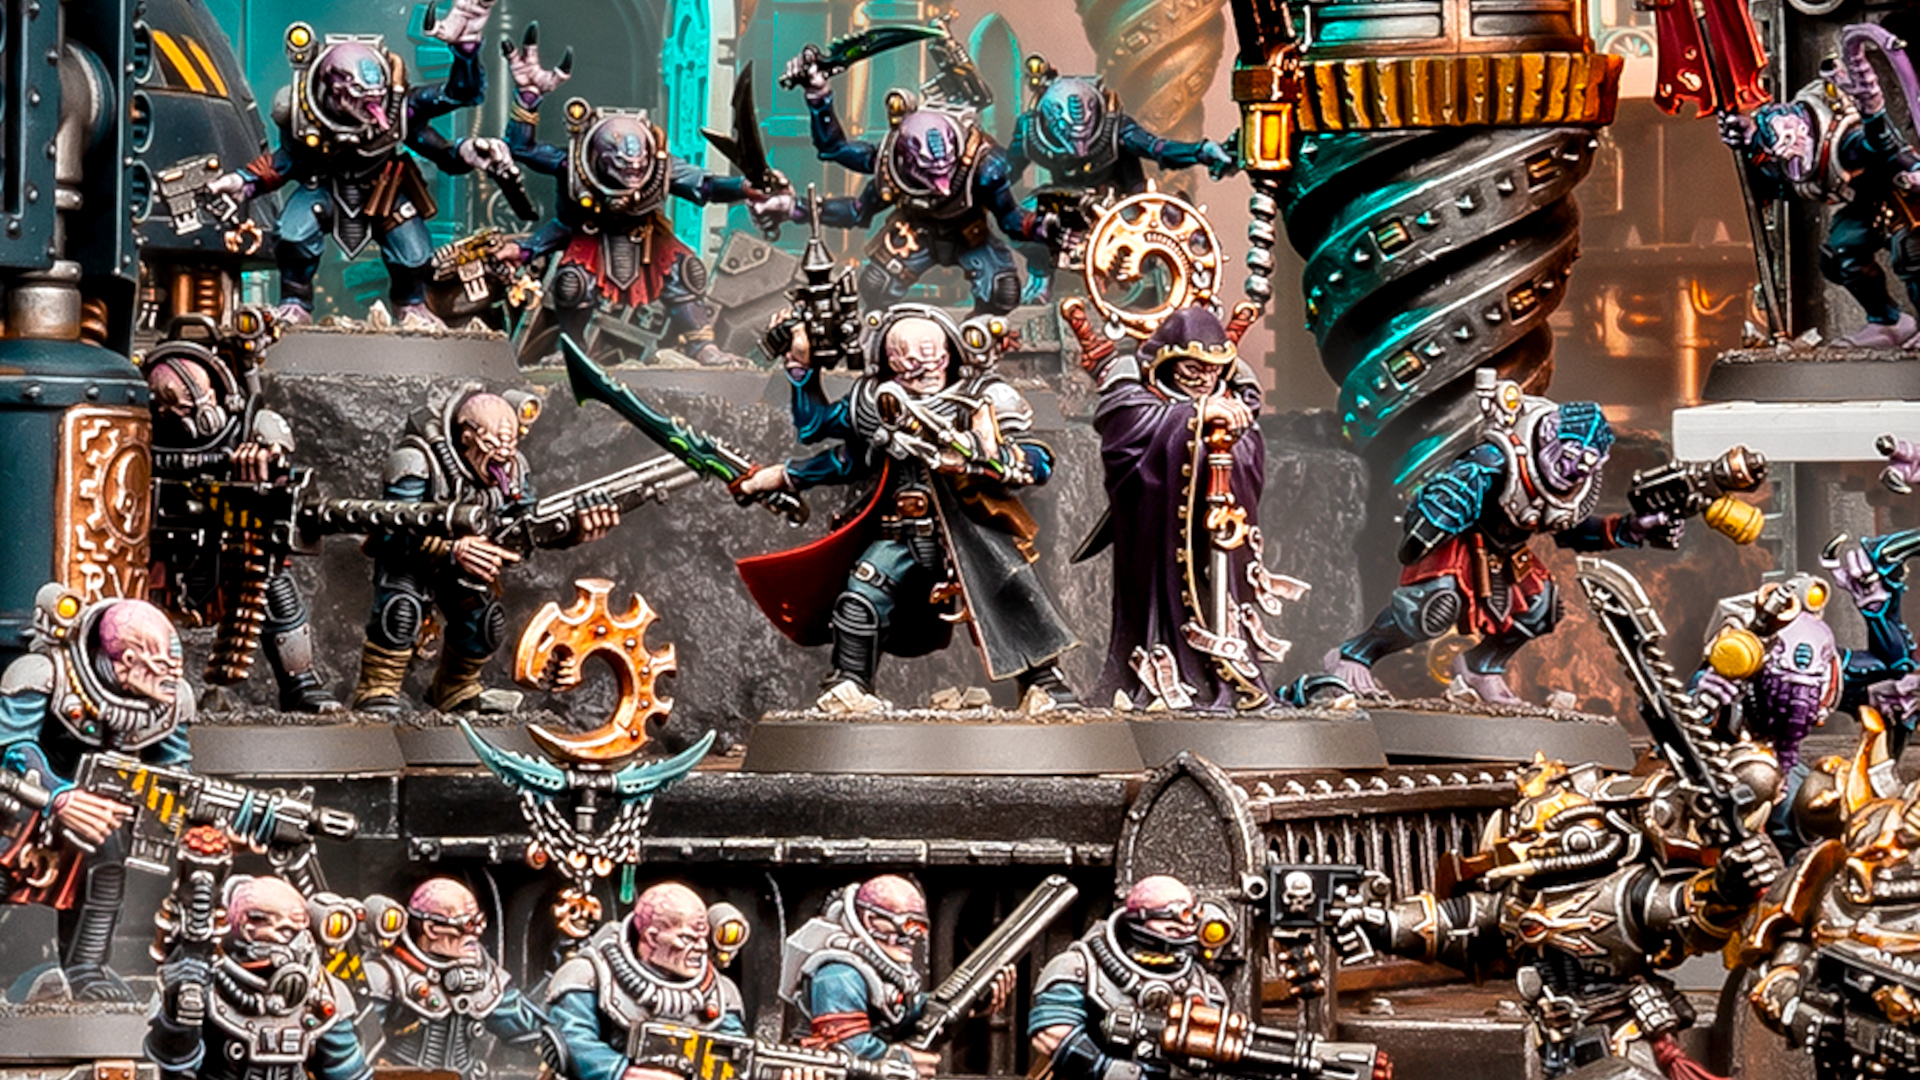 Warhammer 40k factions – all 40k armies and races explained